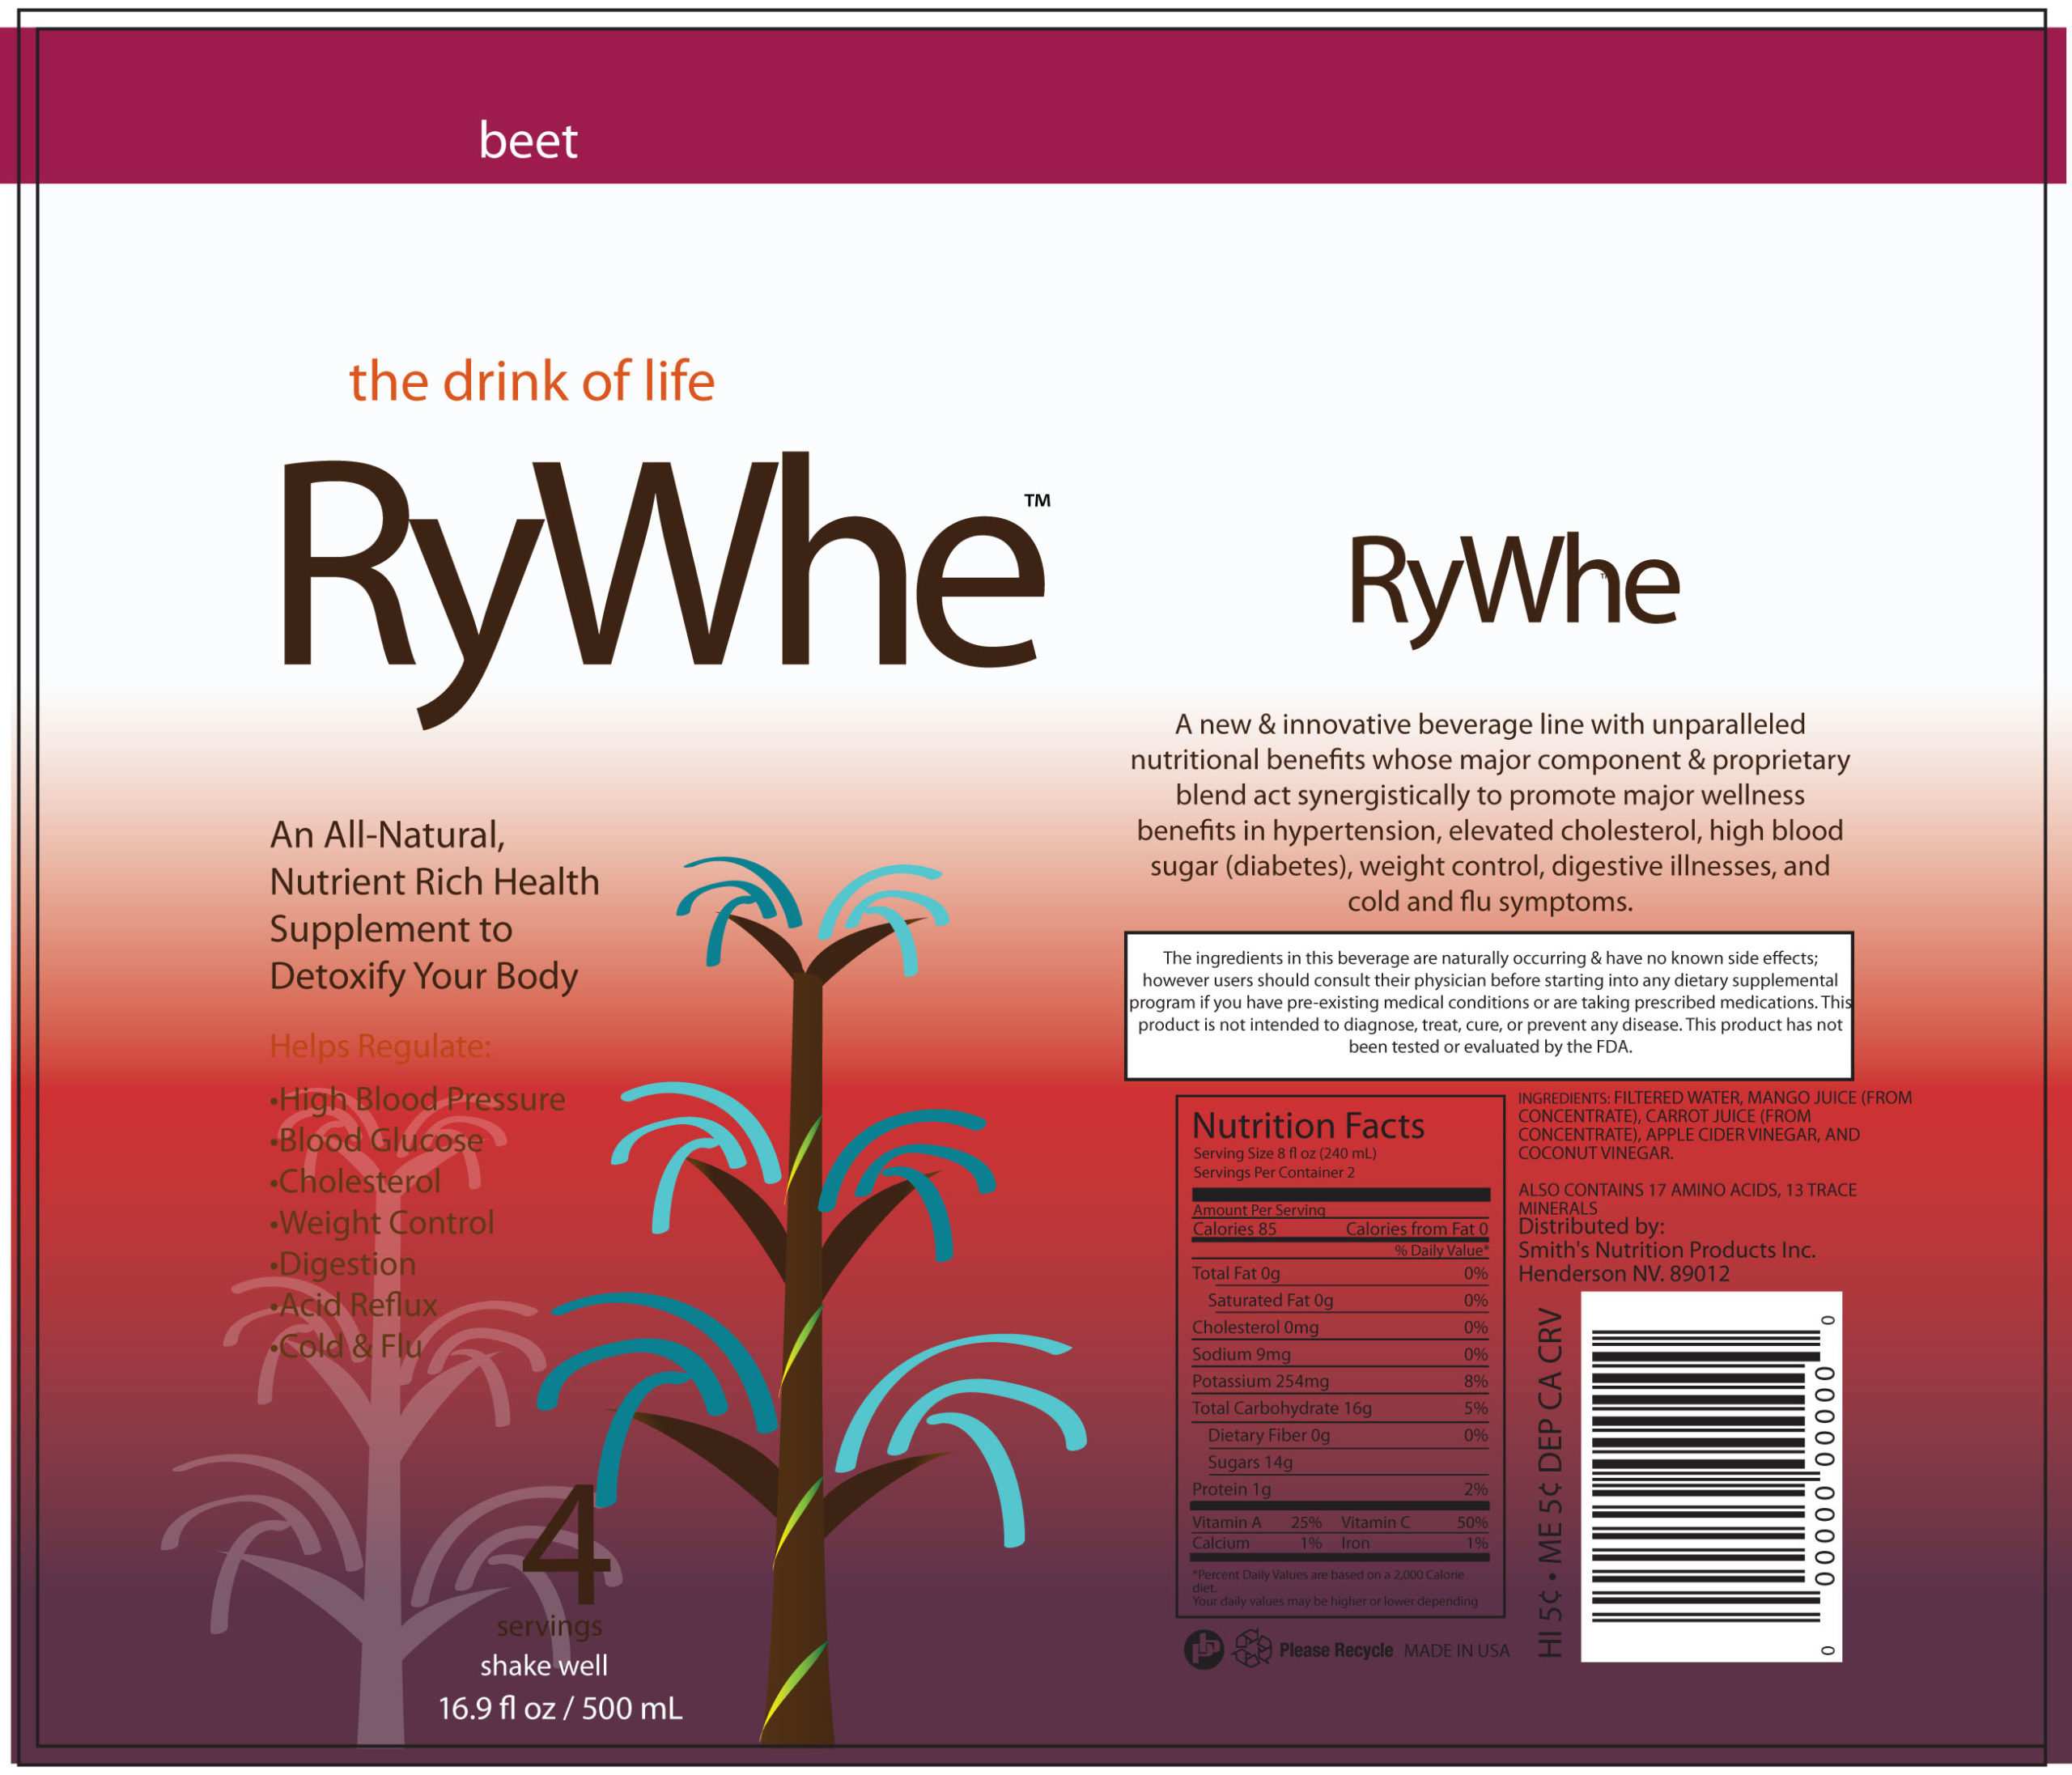 the drink of life RyWhe beet detailed information